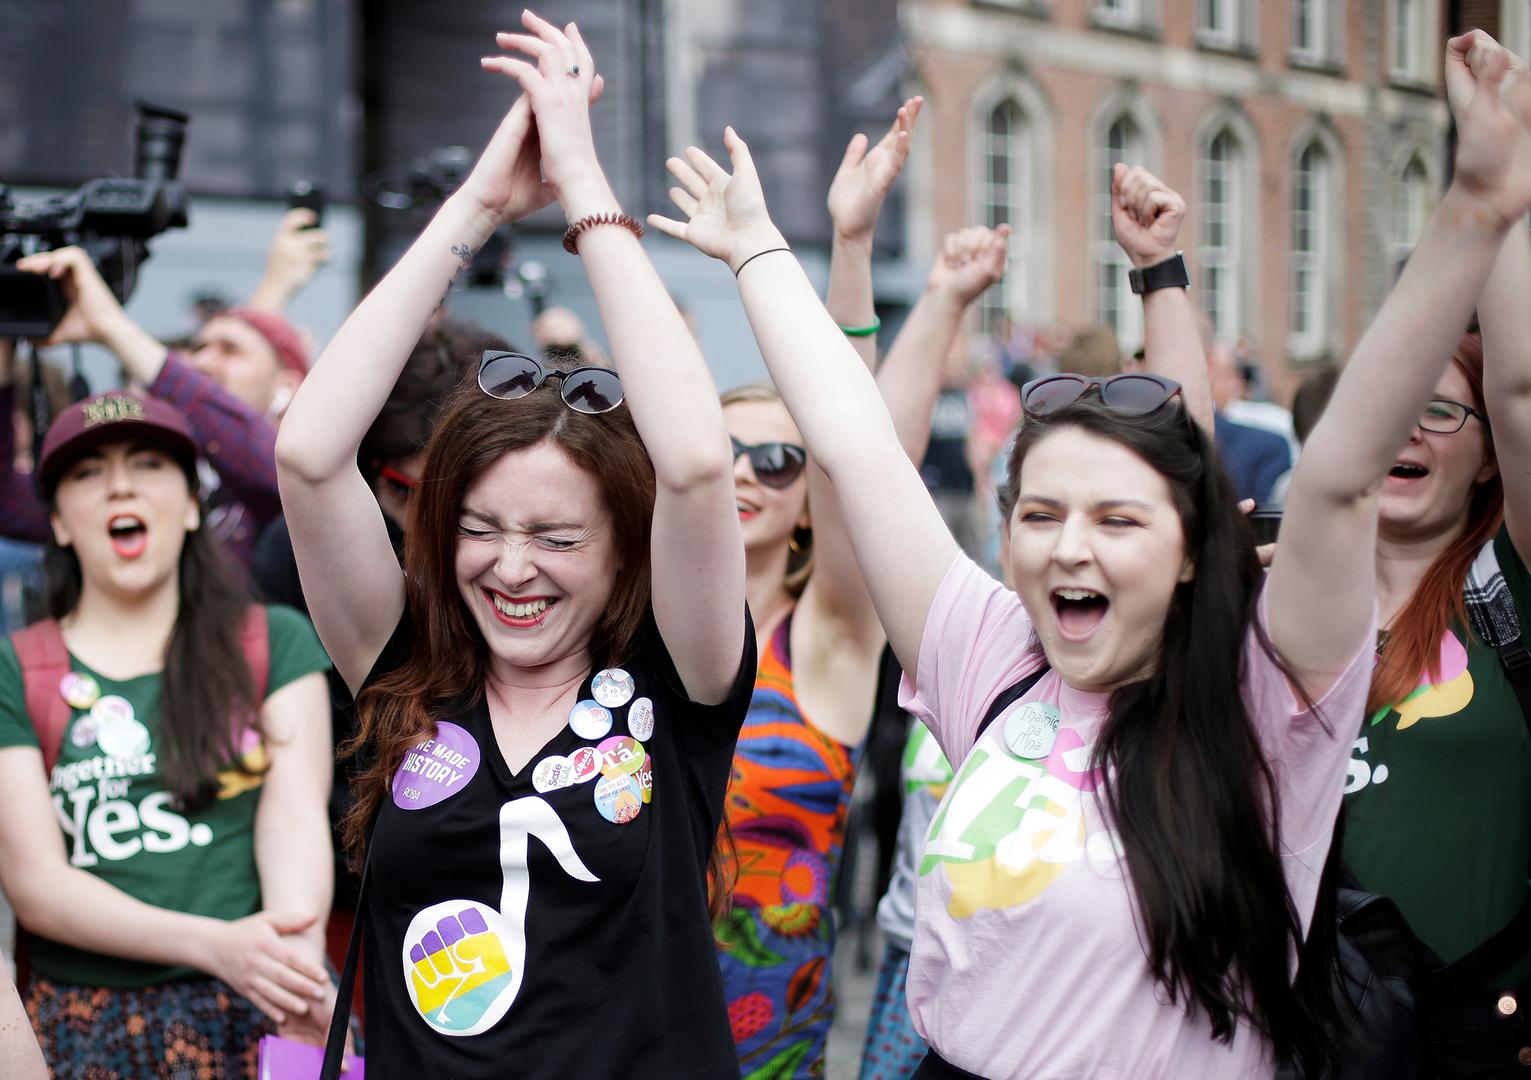 Women celebrate the result of the referendum on liberalizing abortion law, in Dublin, Ireland, May 26, 2018.